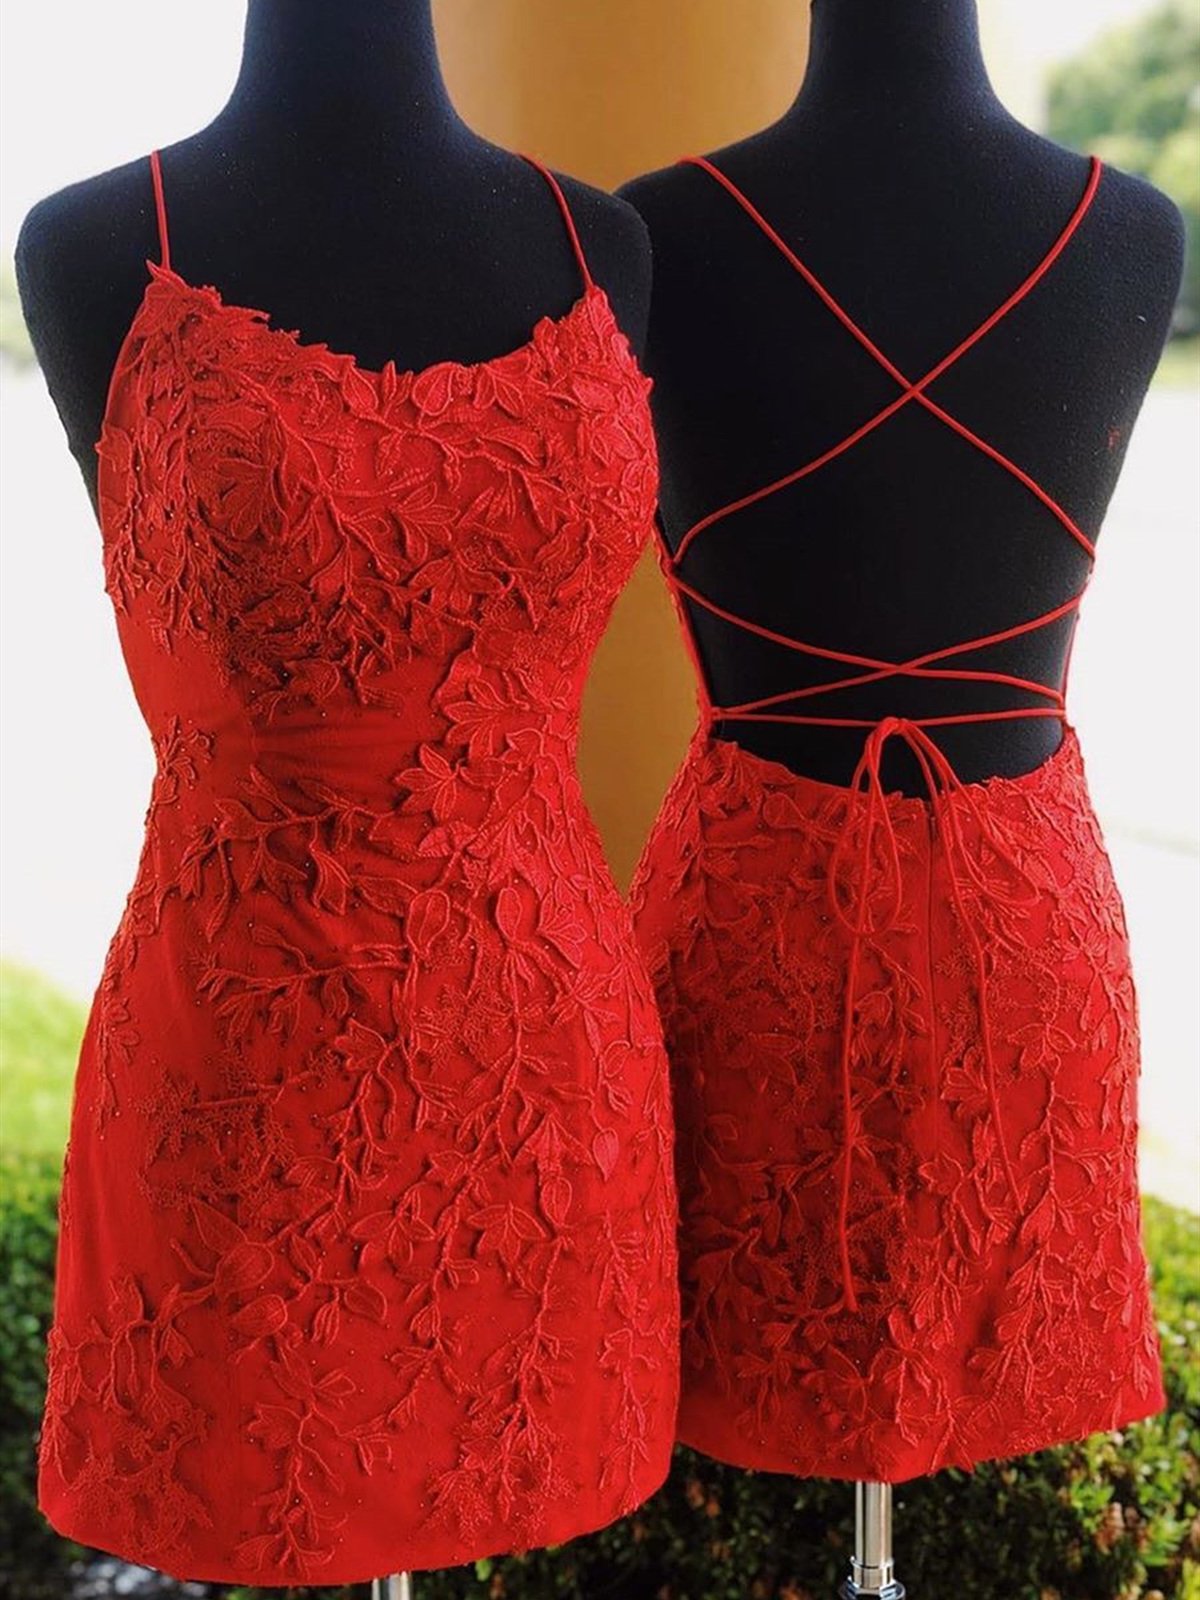 Prom Dresses Cute, Short Red Backless Lace Prom Dresses, Short Red Backless Lace Formal Homecoming Graduation Dresses